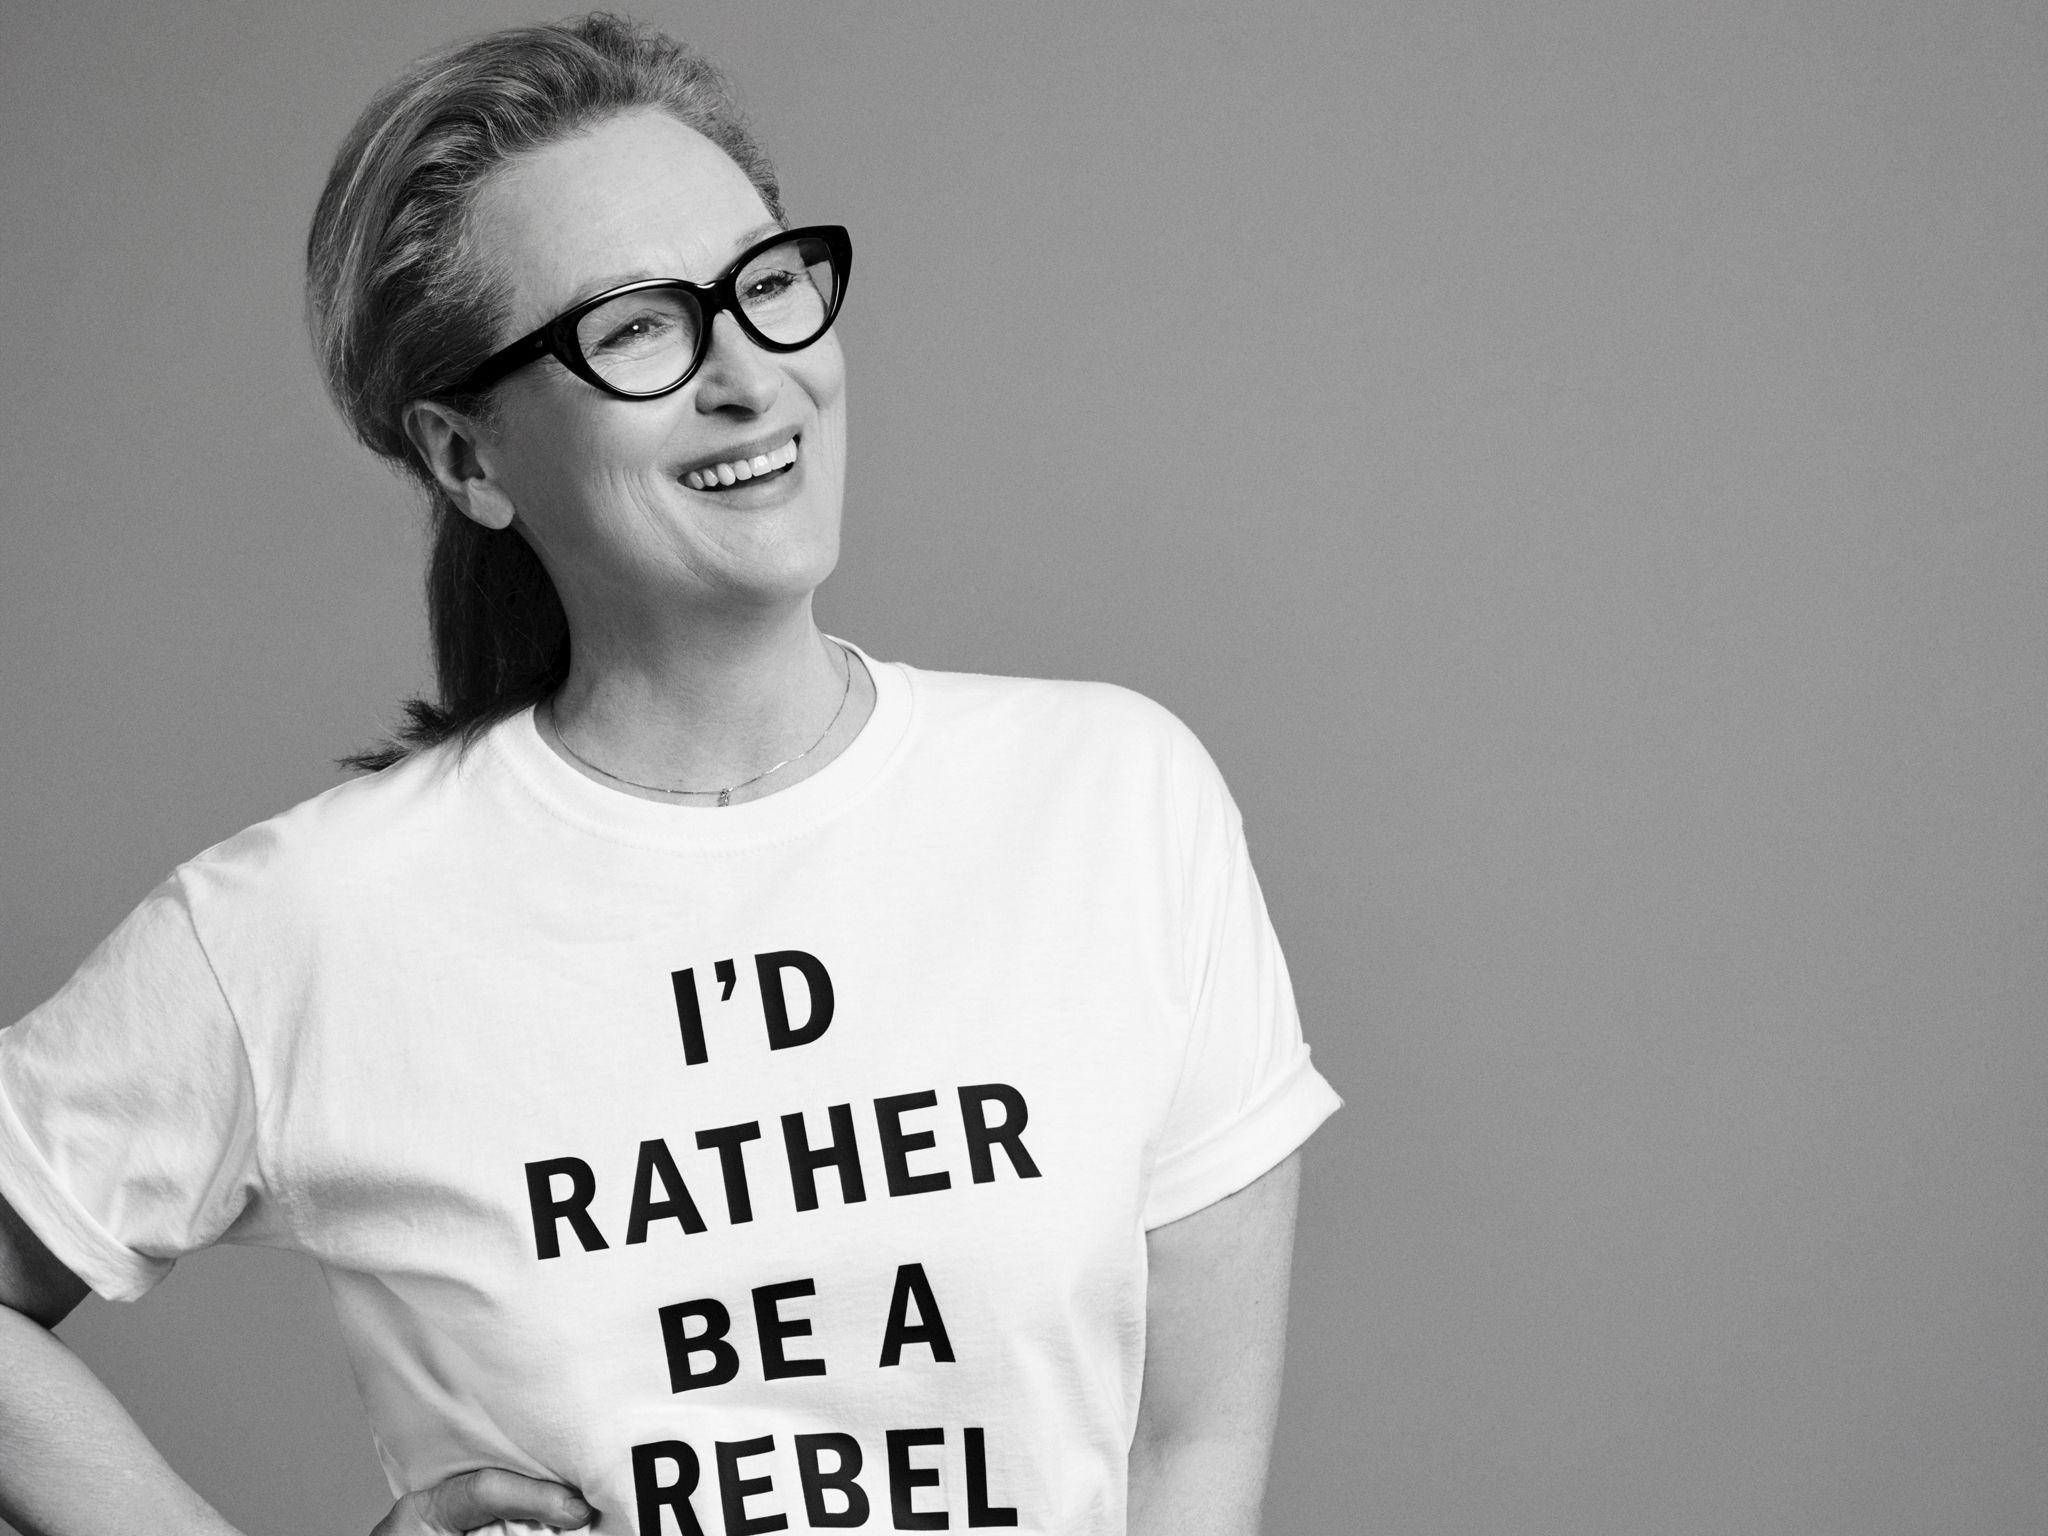 Meryl Streep and the stars of 'Suffragette' on feminism in Hollywood